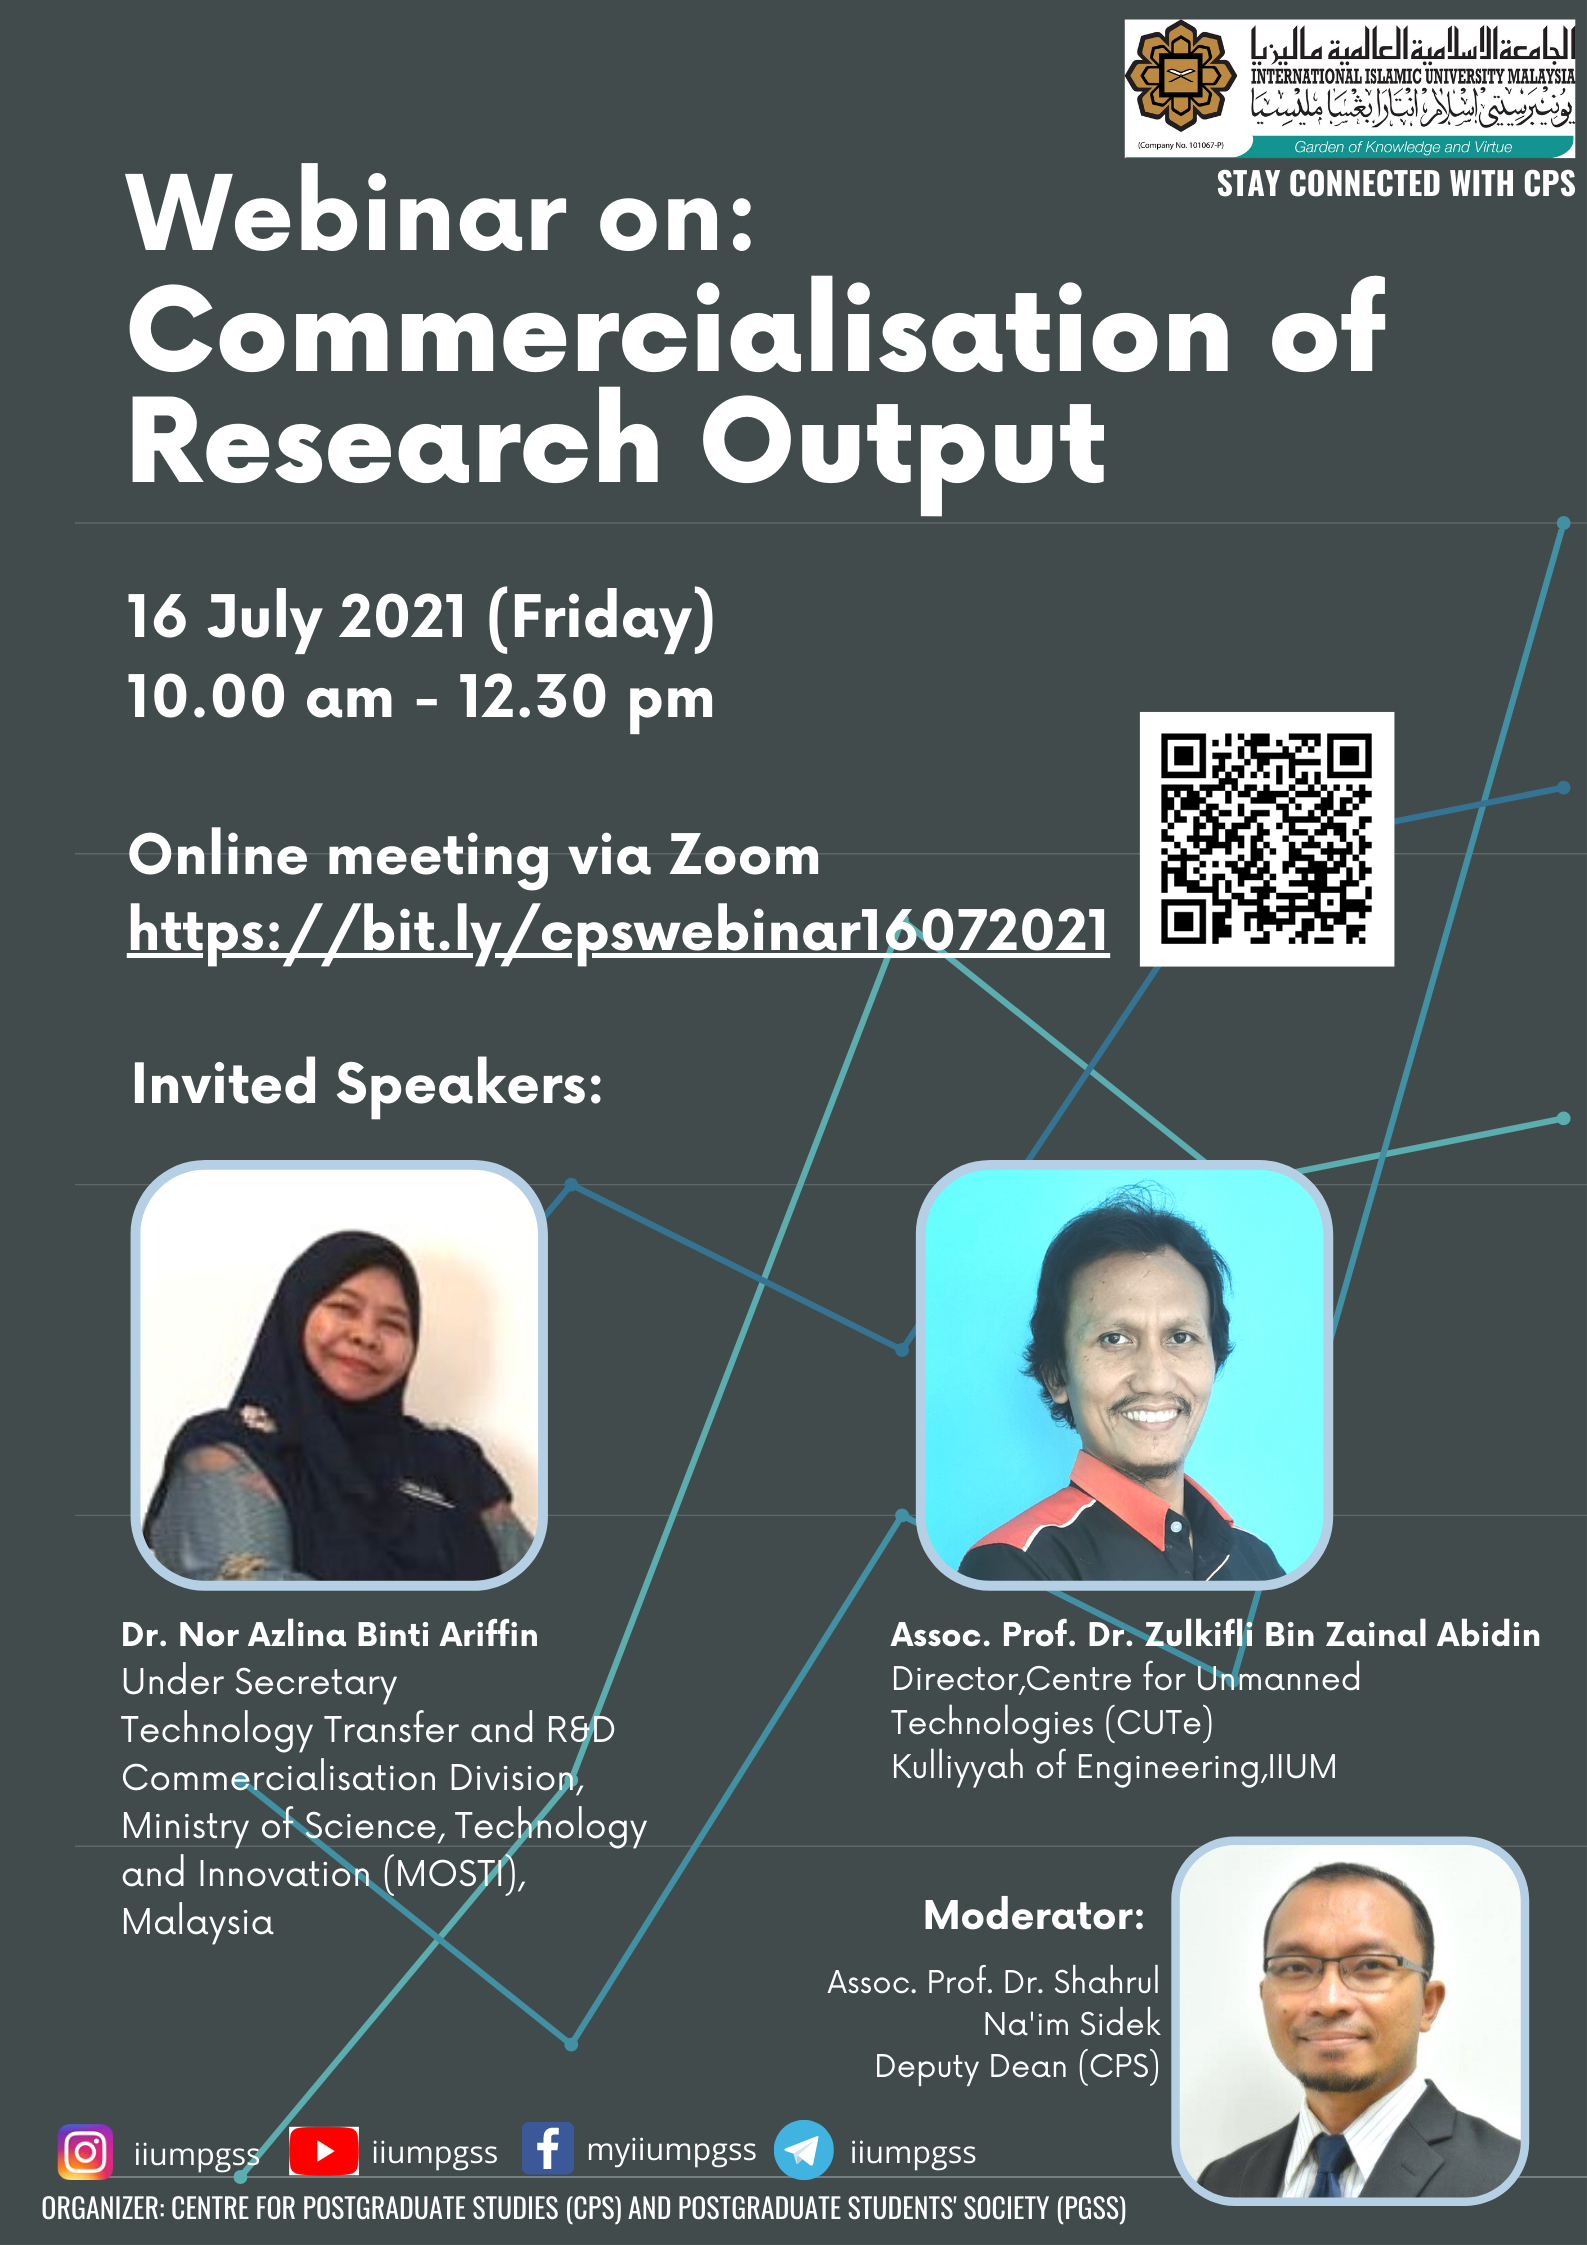 INVITATION TO ATTEND WEBINAR ON COMMERCIALISATION OF RESEARCH OUTPUT